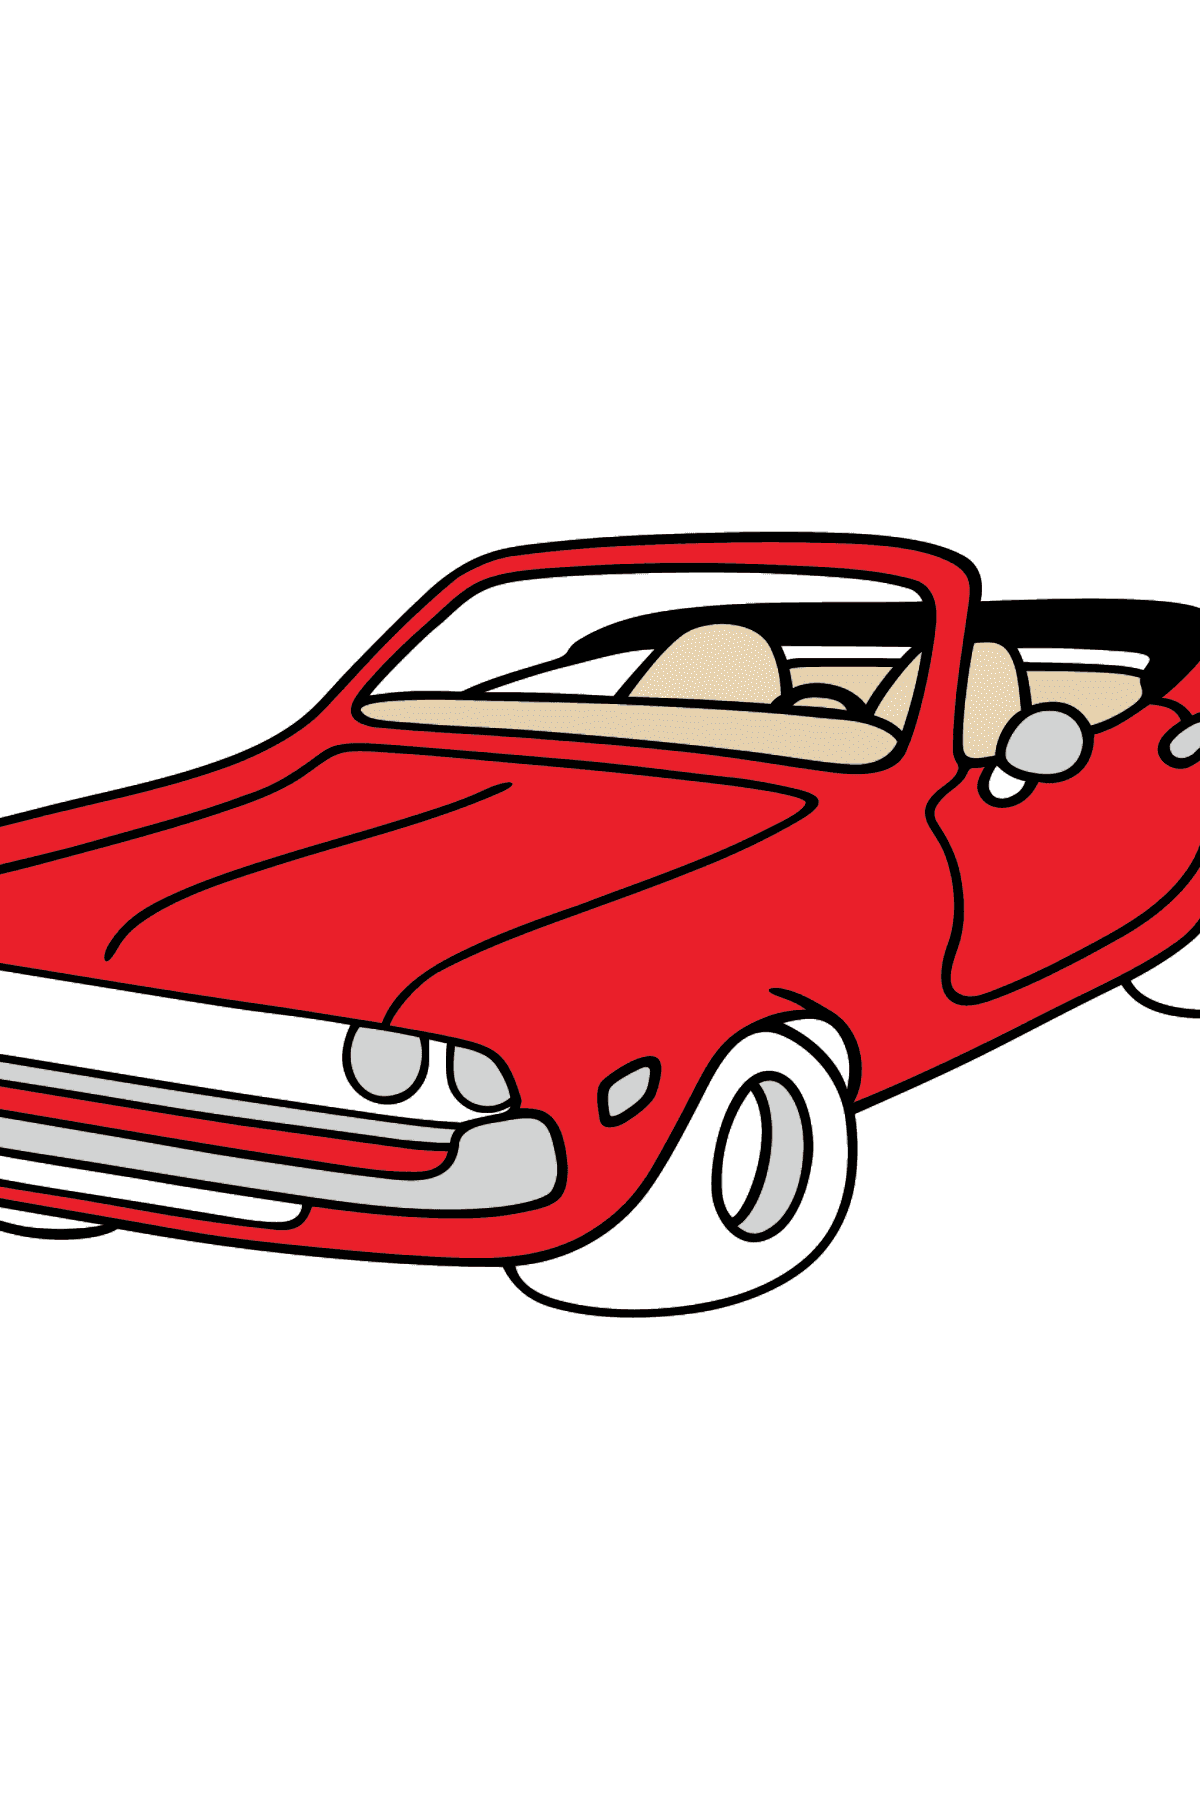 Open Top Cars coloring page - Coloring Pages for Kids